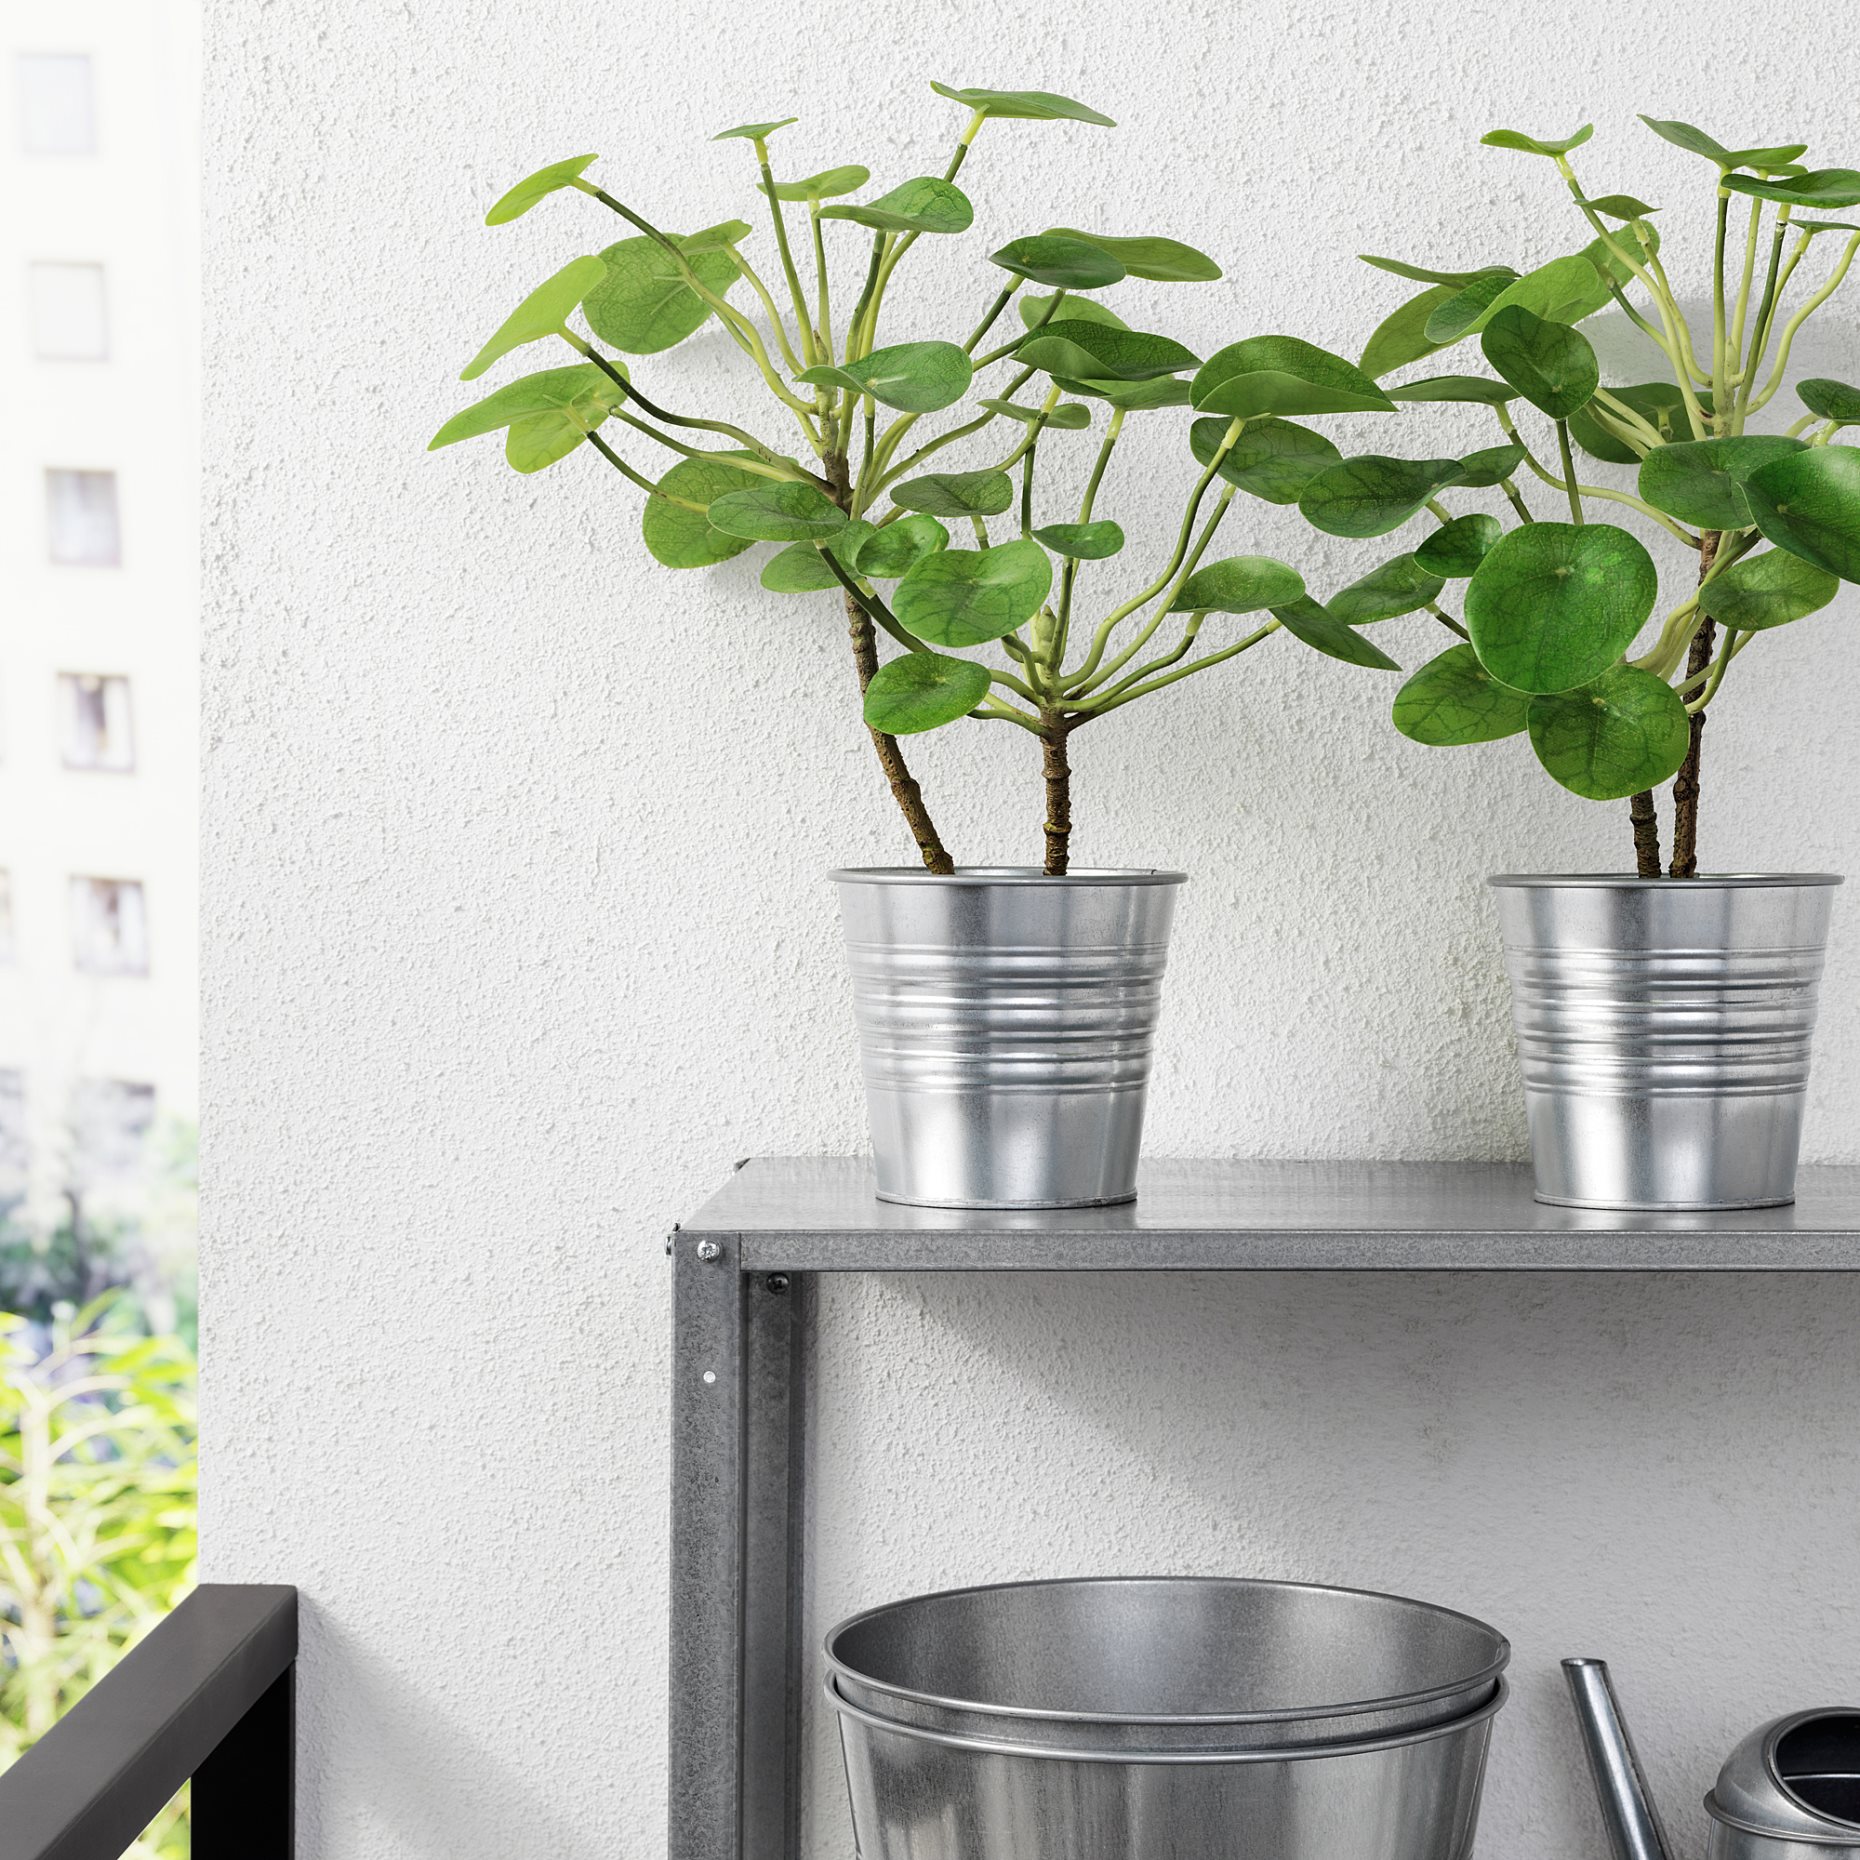 FEJKA, artificial potted plant in/outdoor/Pilea, 12 cm, 503.953.15